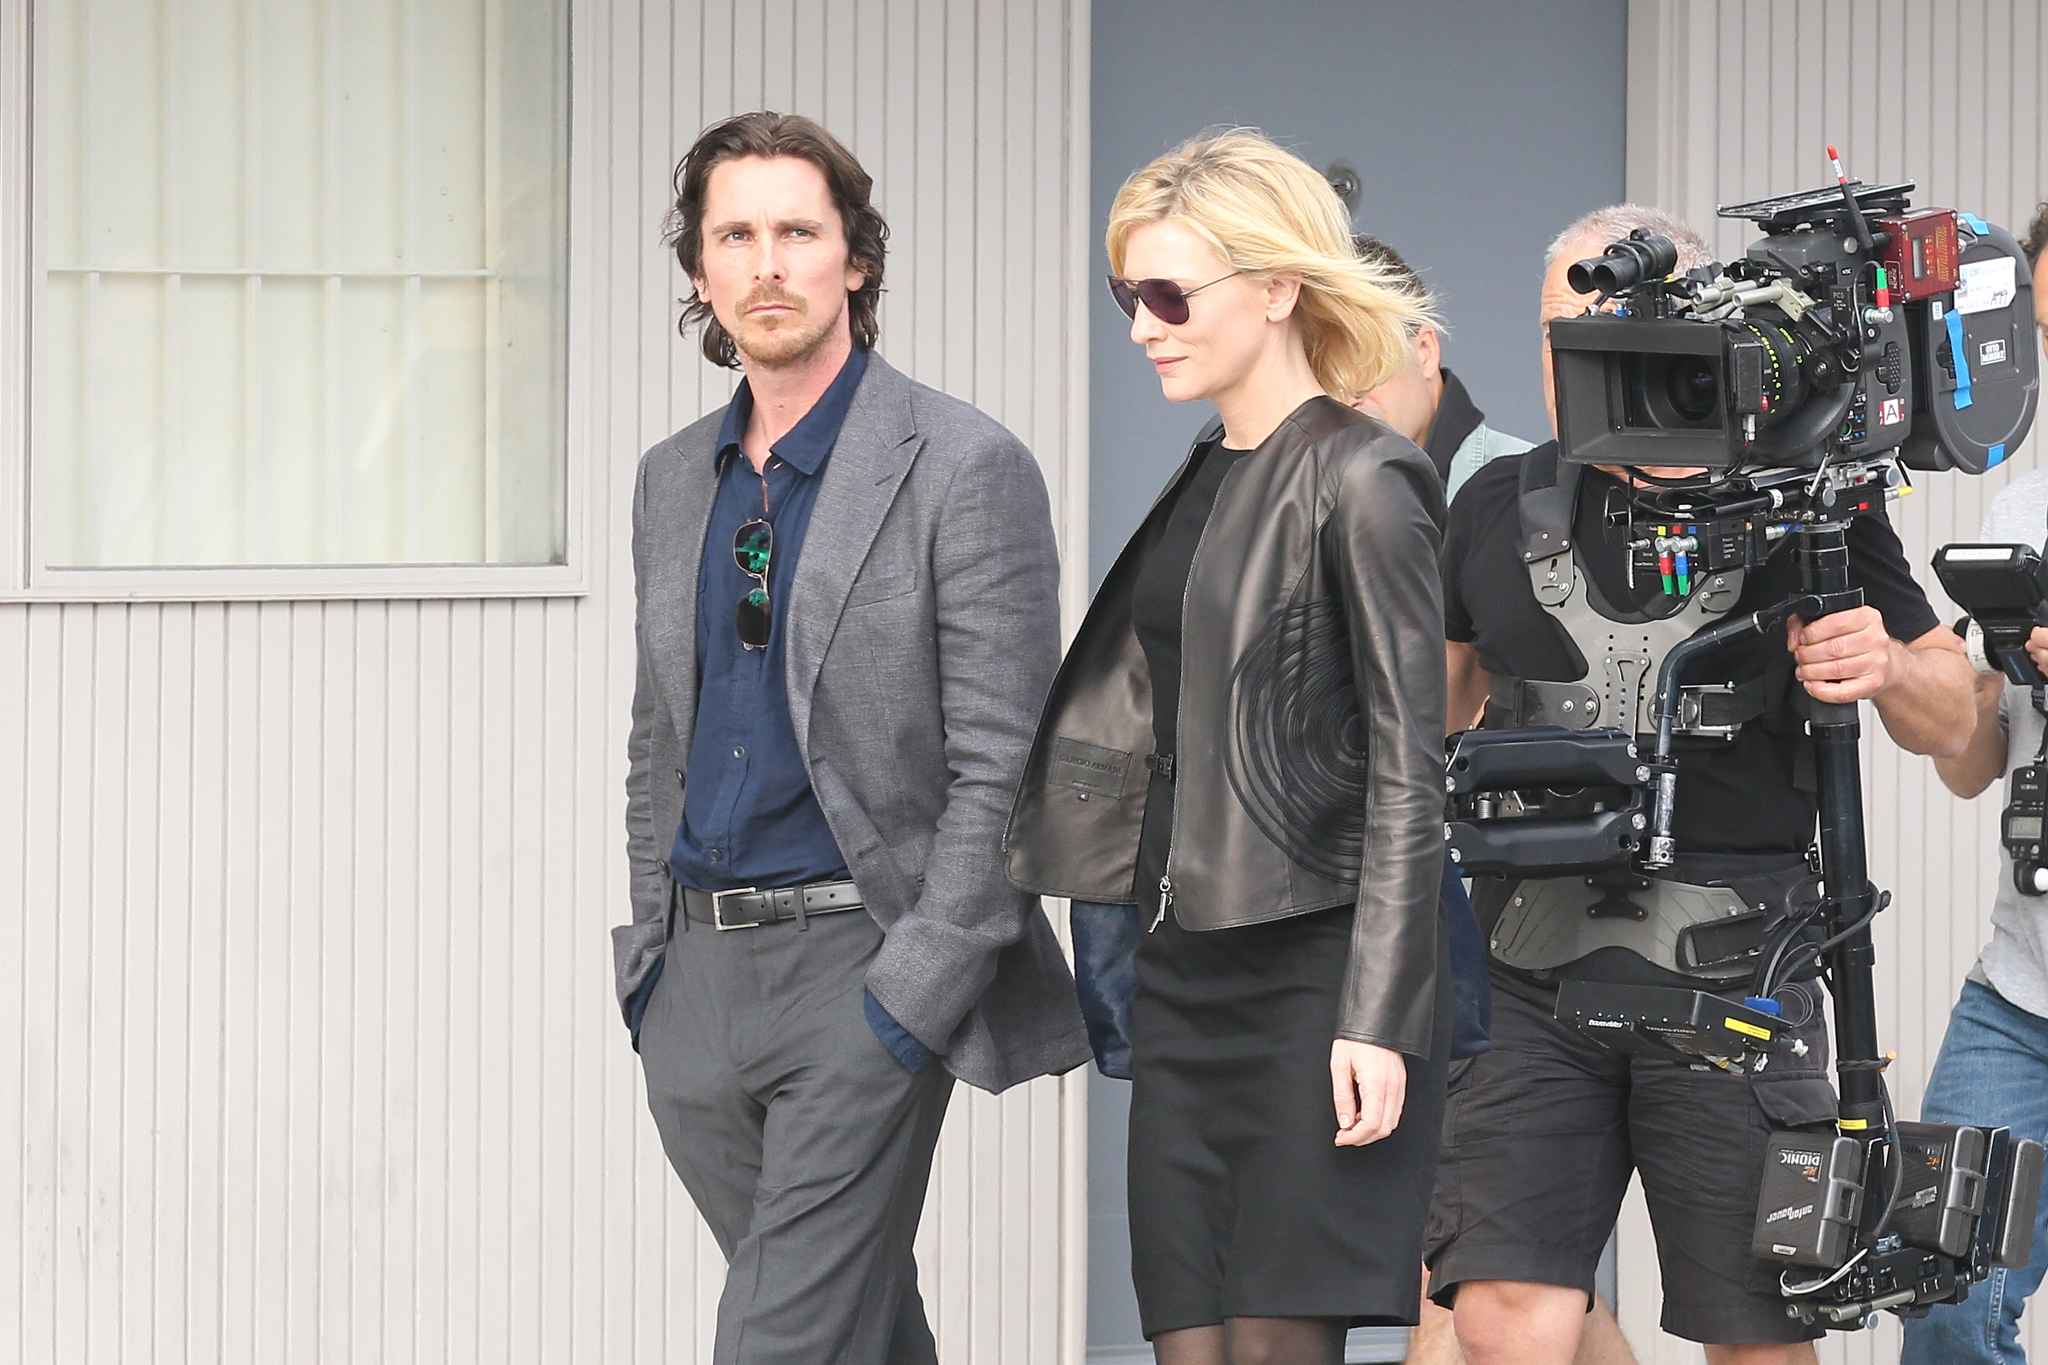 Christian Bale and Cate Blanchett in Knight of Cups (2015)